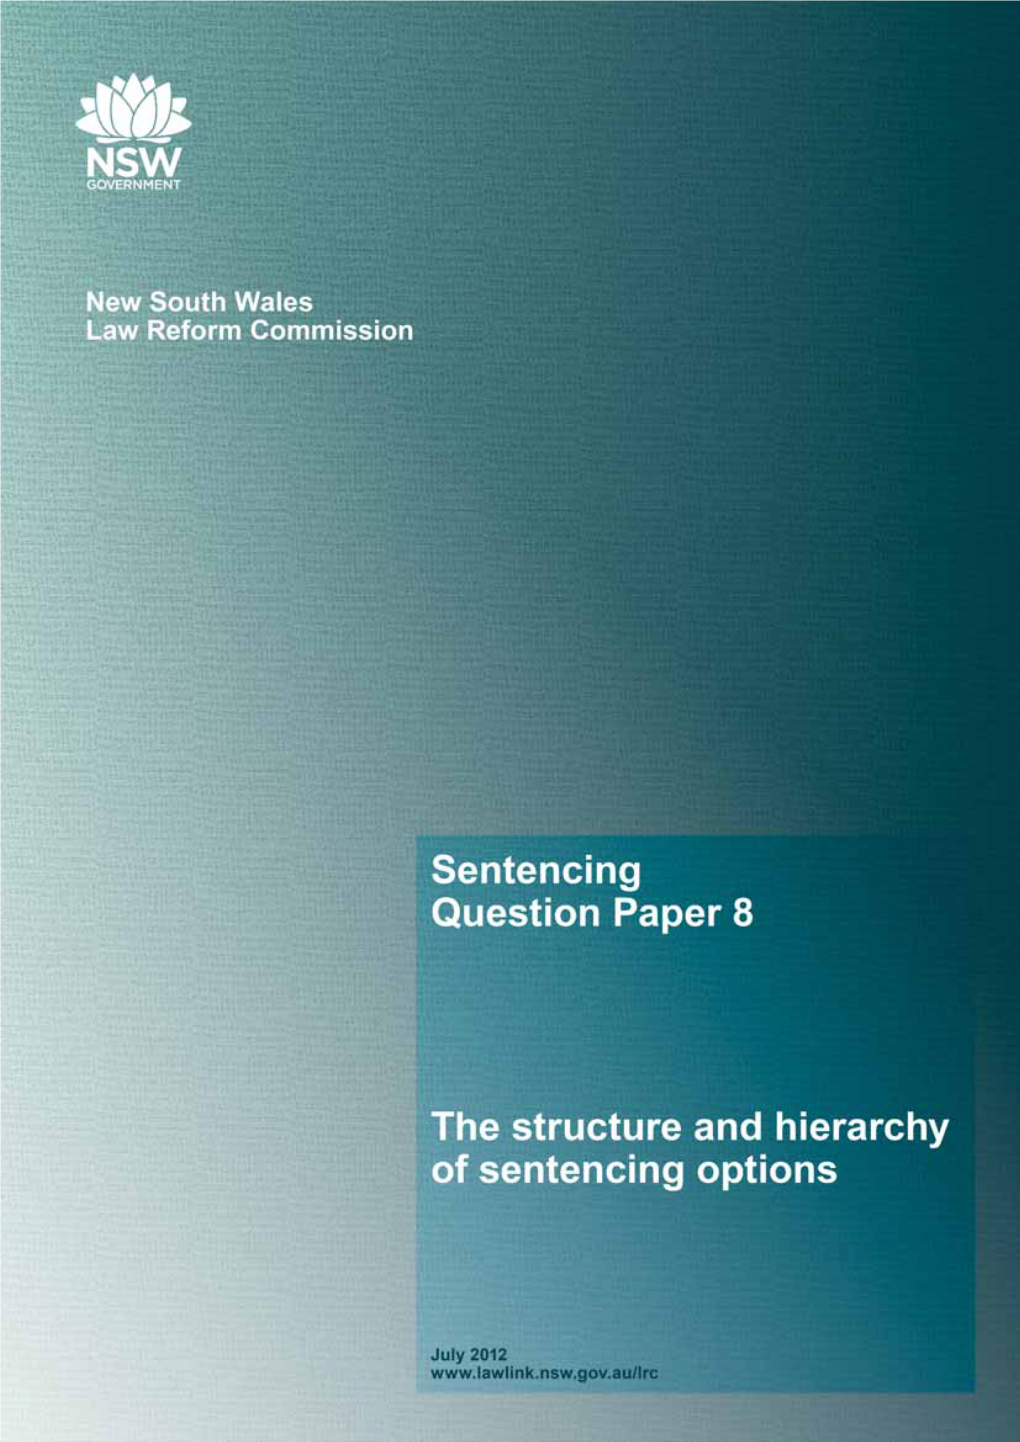 Question Paper 8: the Structure and Hierarchy of Sentencing Options